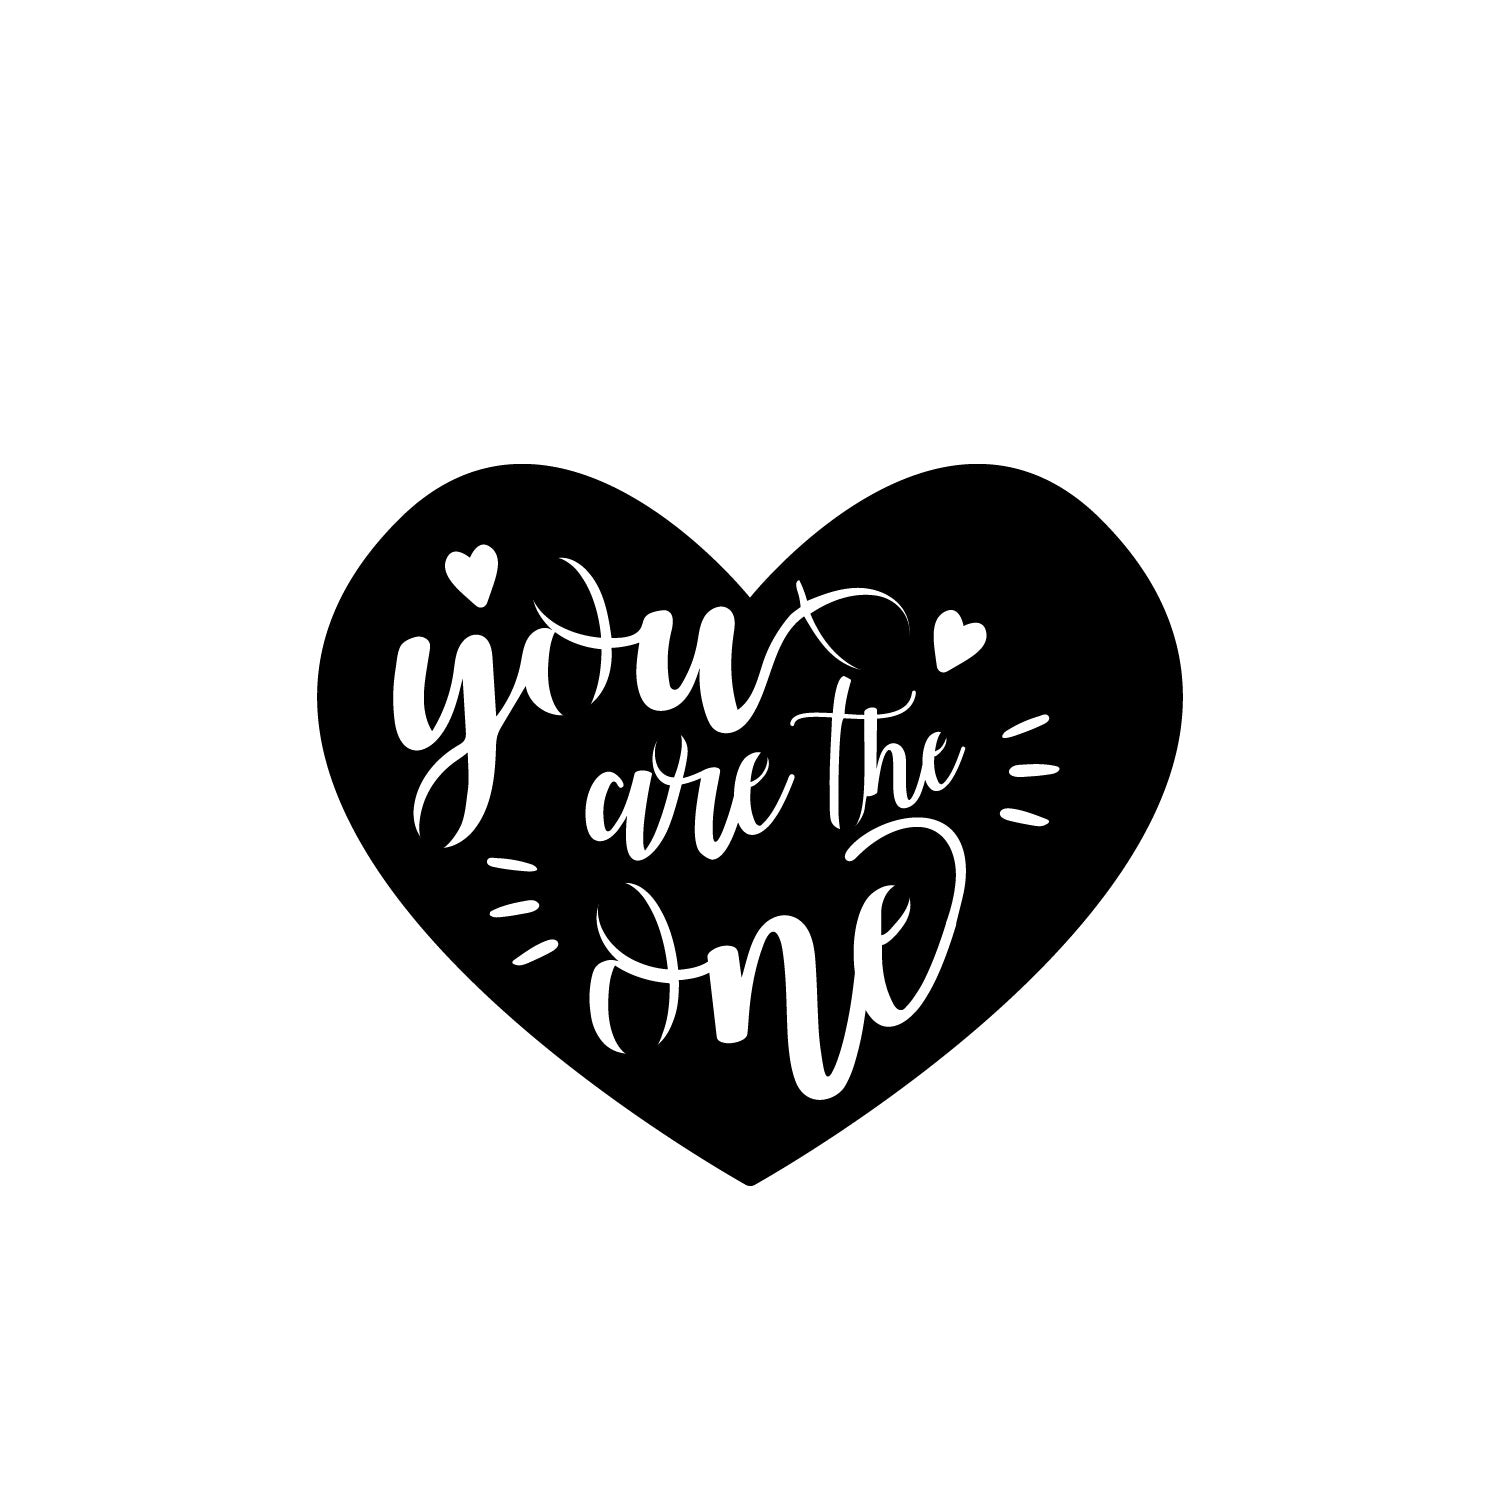 "You are the One" Love Theme Black Engineered Wood Wall Art Cutout, Ready to Hang Home Decor 2